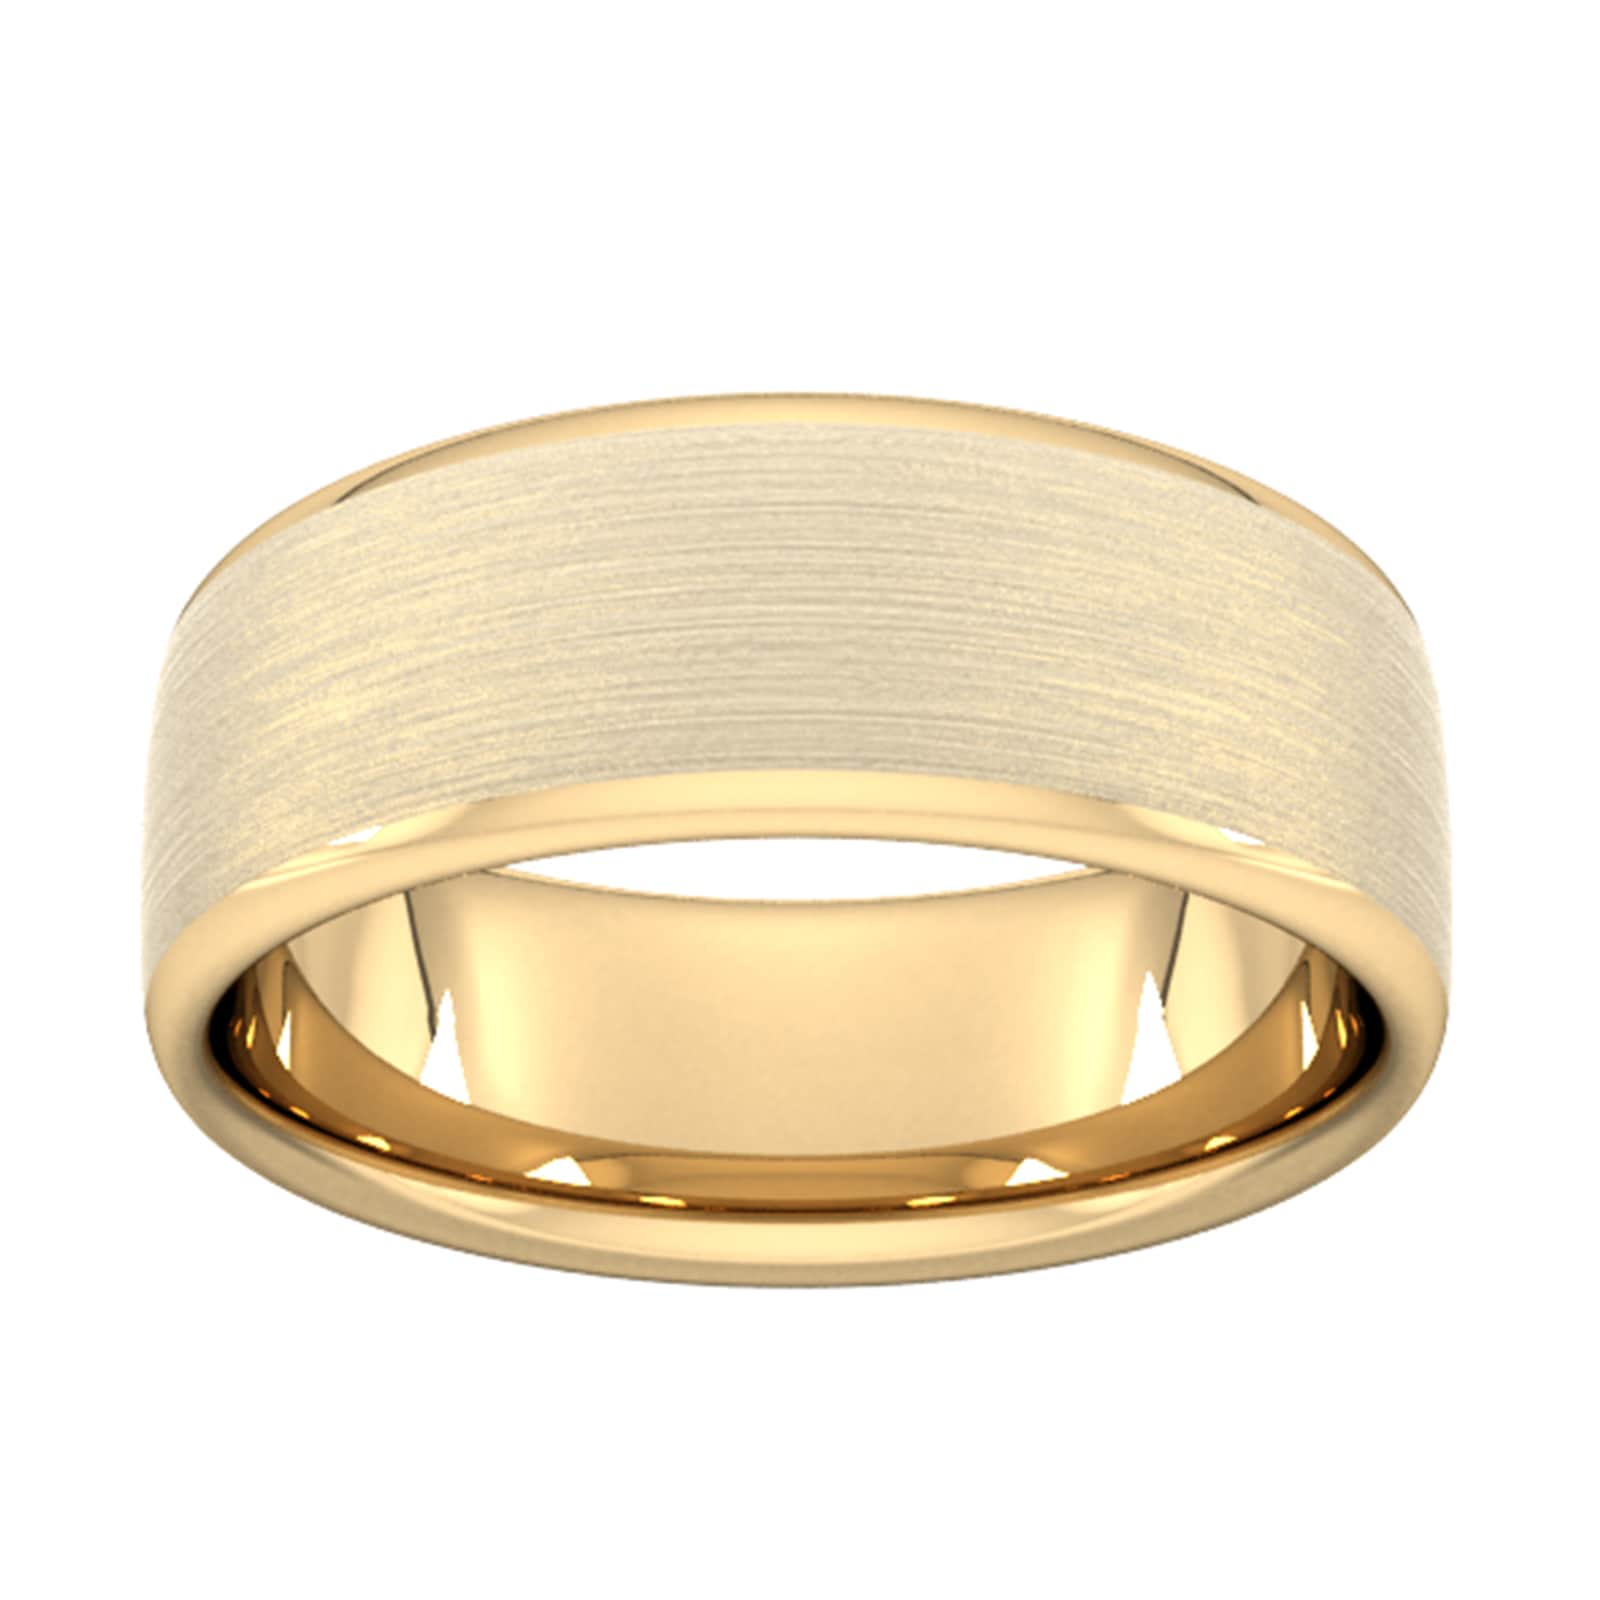 8mm Slight Court Extra Heavy Matt Finished Wedding Ring In 18 Carat Yellow Gold - Ring Size N